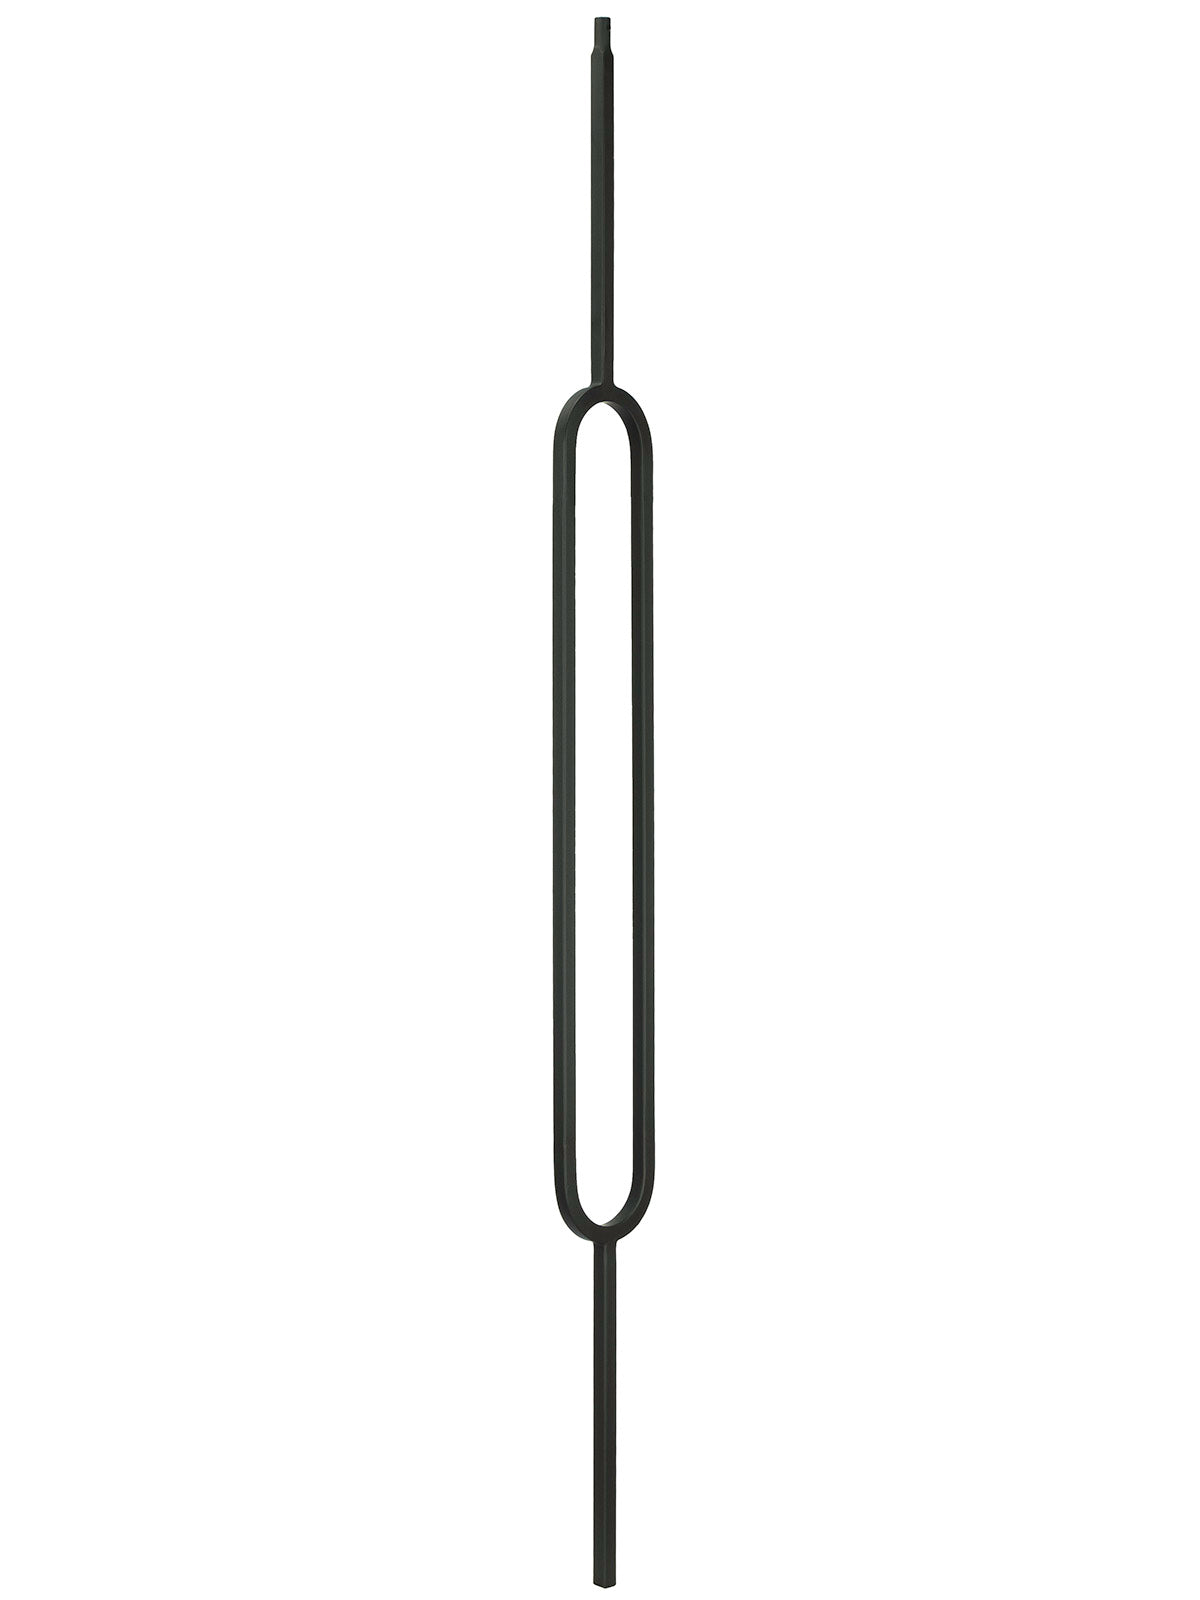 Iron Baluster T80 - 1/2" Square - 24" Contemporary Oval